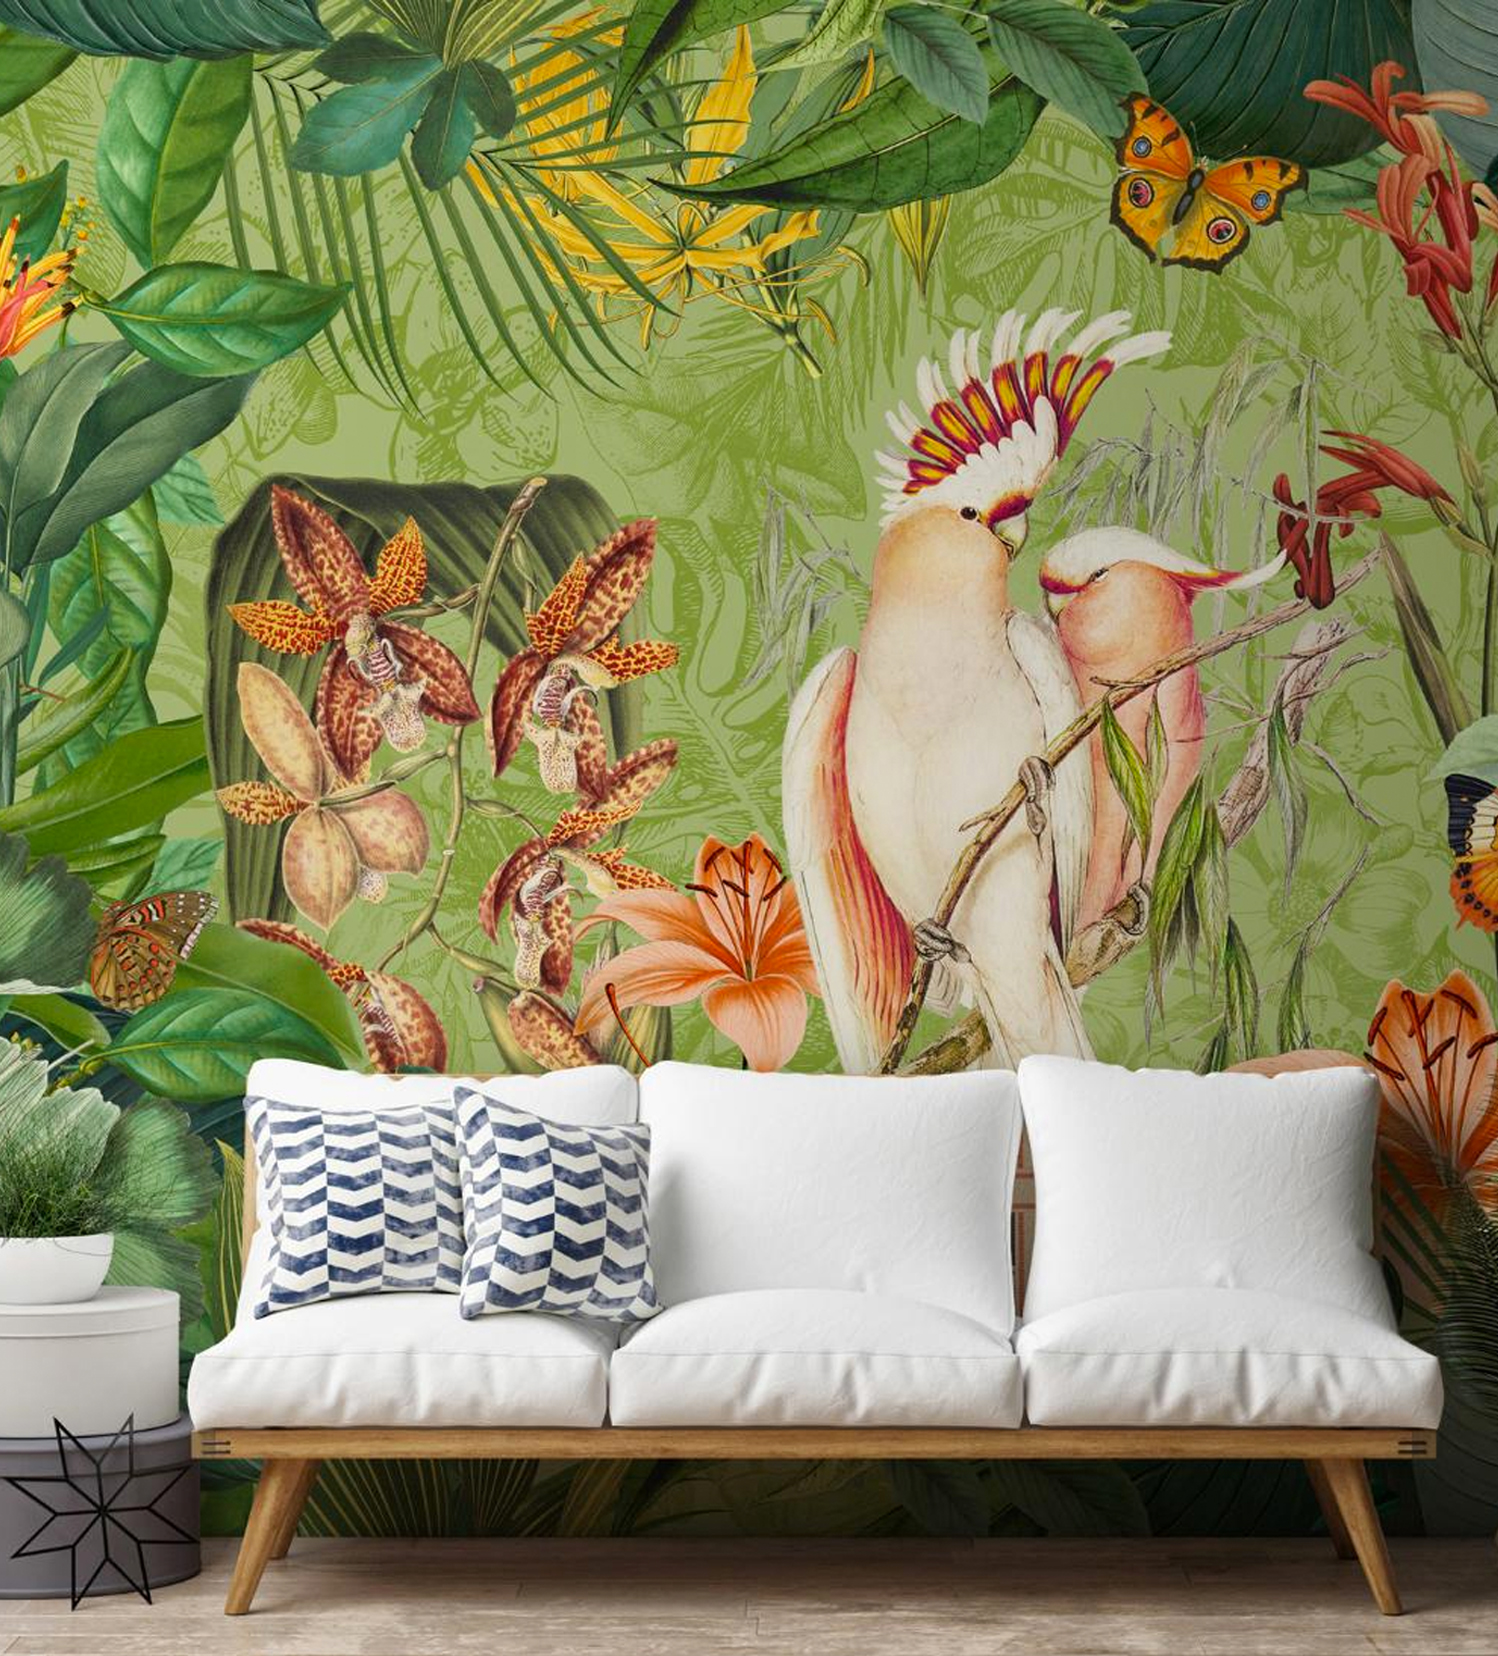 Designed by illustrator Andrea Haase the wallpapers feature vintage-style maps underneath intricately illustrated jungle sce